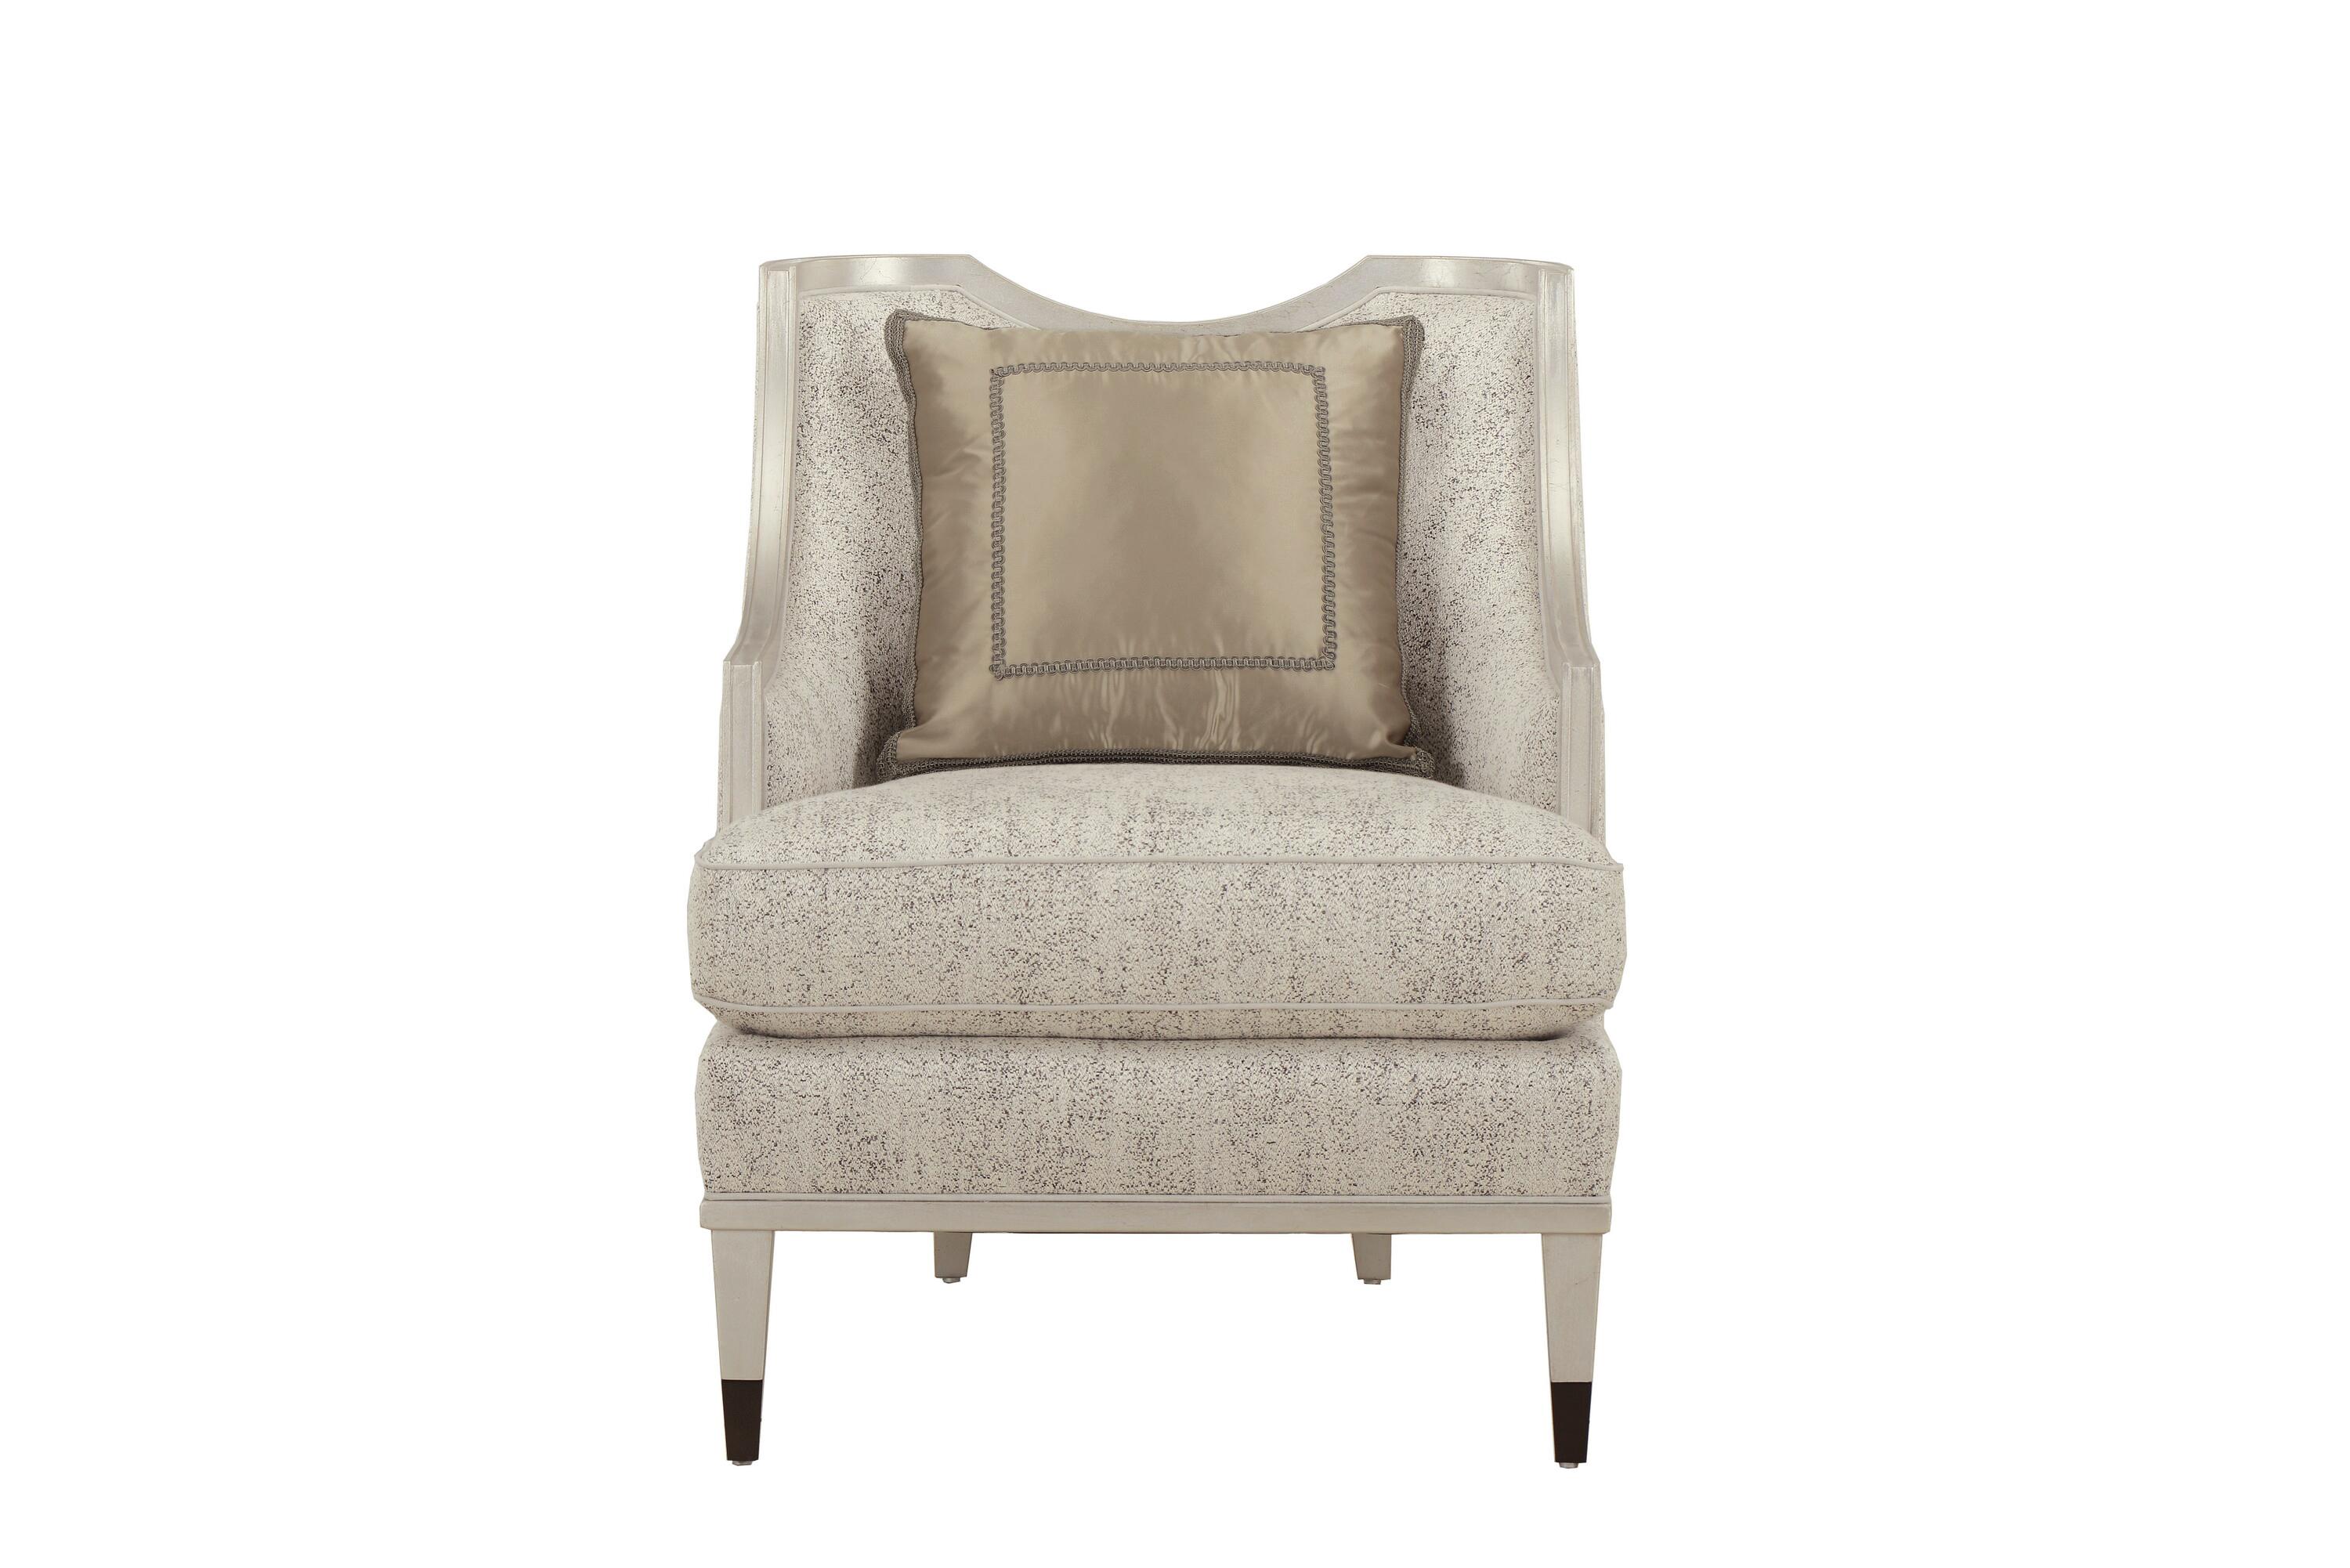 Classic, Traditional Accent Chair Harper 161523-7127AA in Gray Fabric